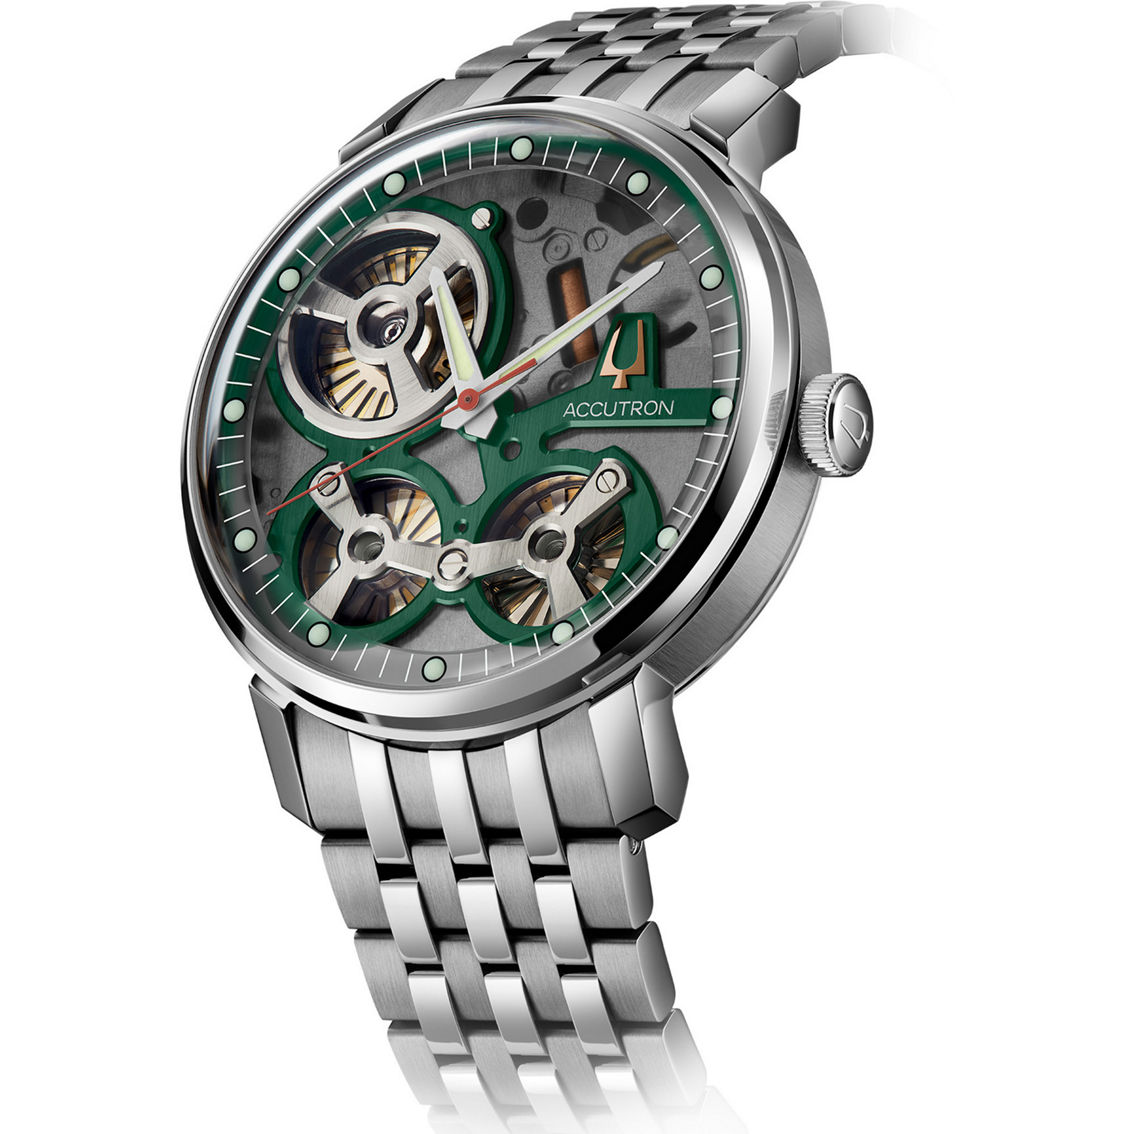 Accutron Men's Electrostatic Spaceview 2020 Stainless Steel Bracelet Watch 2ES6A006 - Image 2 of 2